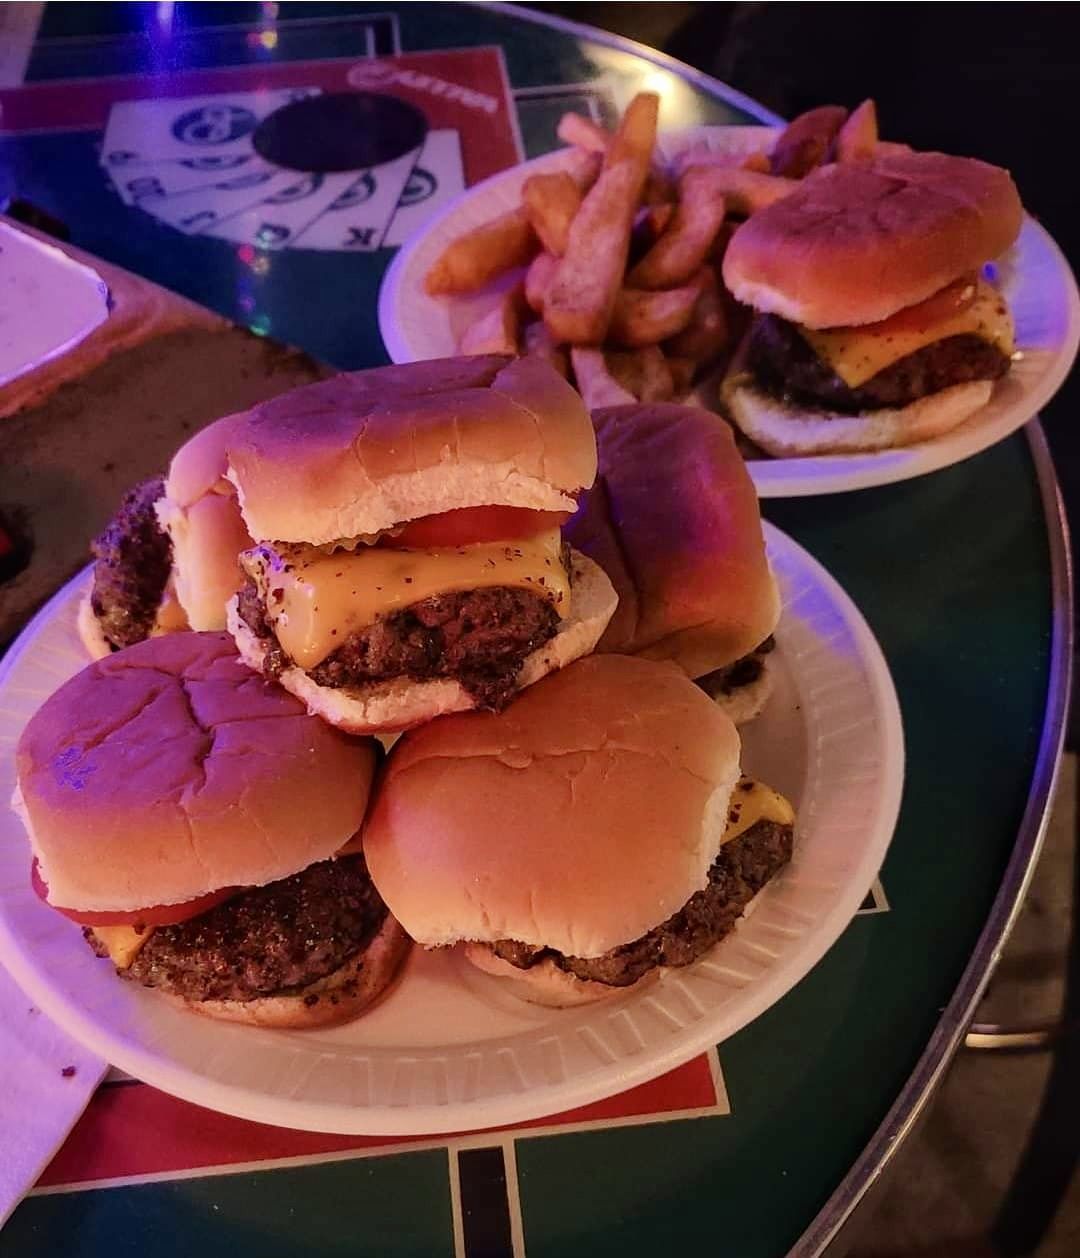 A plate of late night bites on a table.